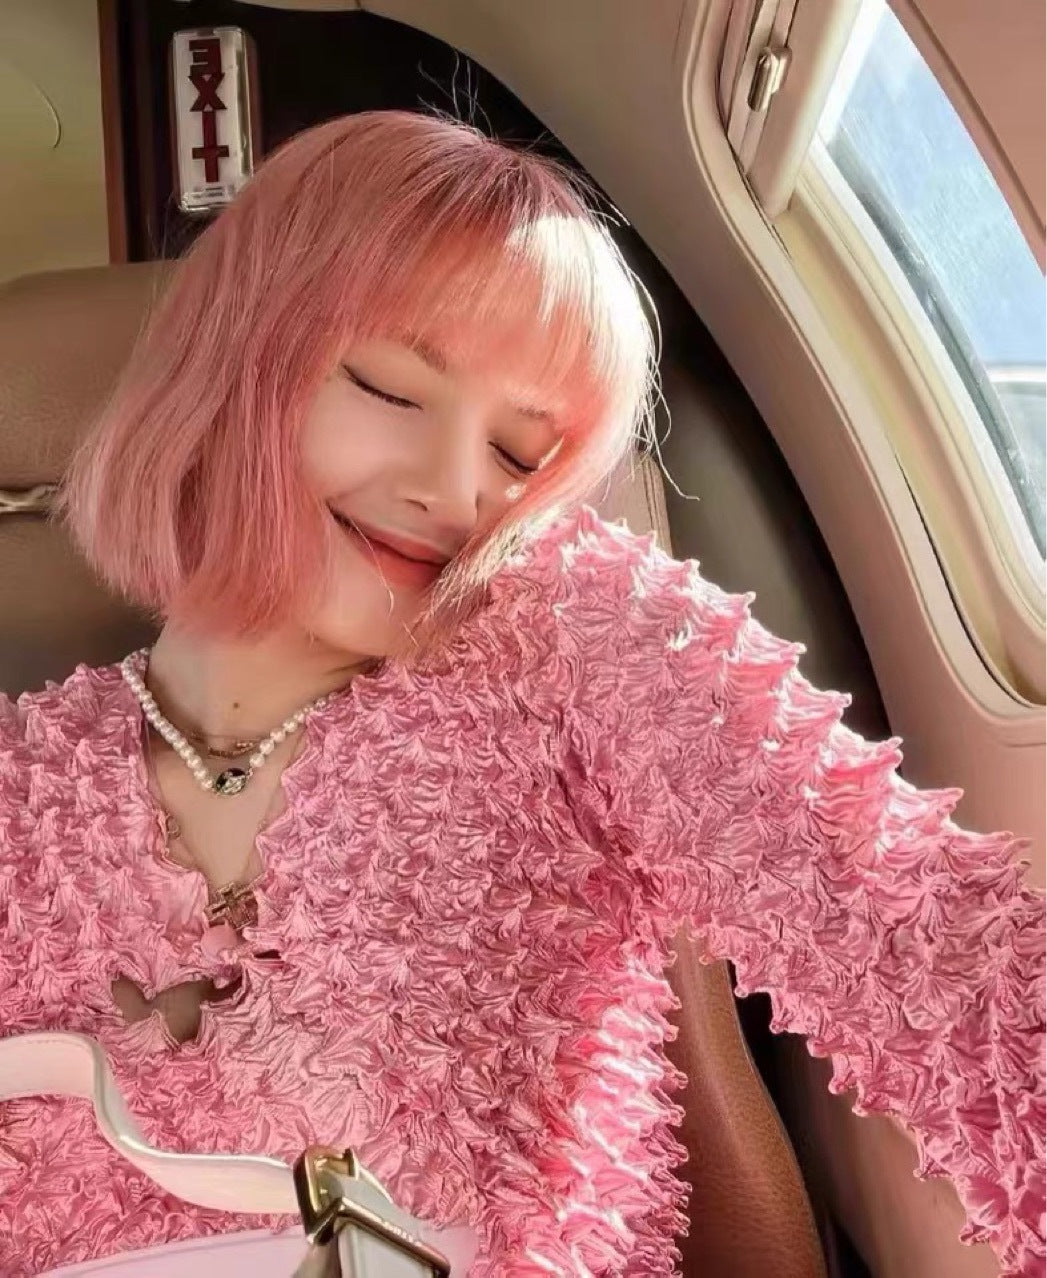 Blackpink Lisa Inspired Pink Crumpled Style Open Cardigan